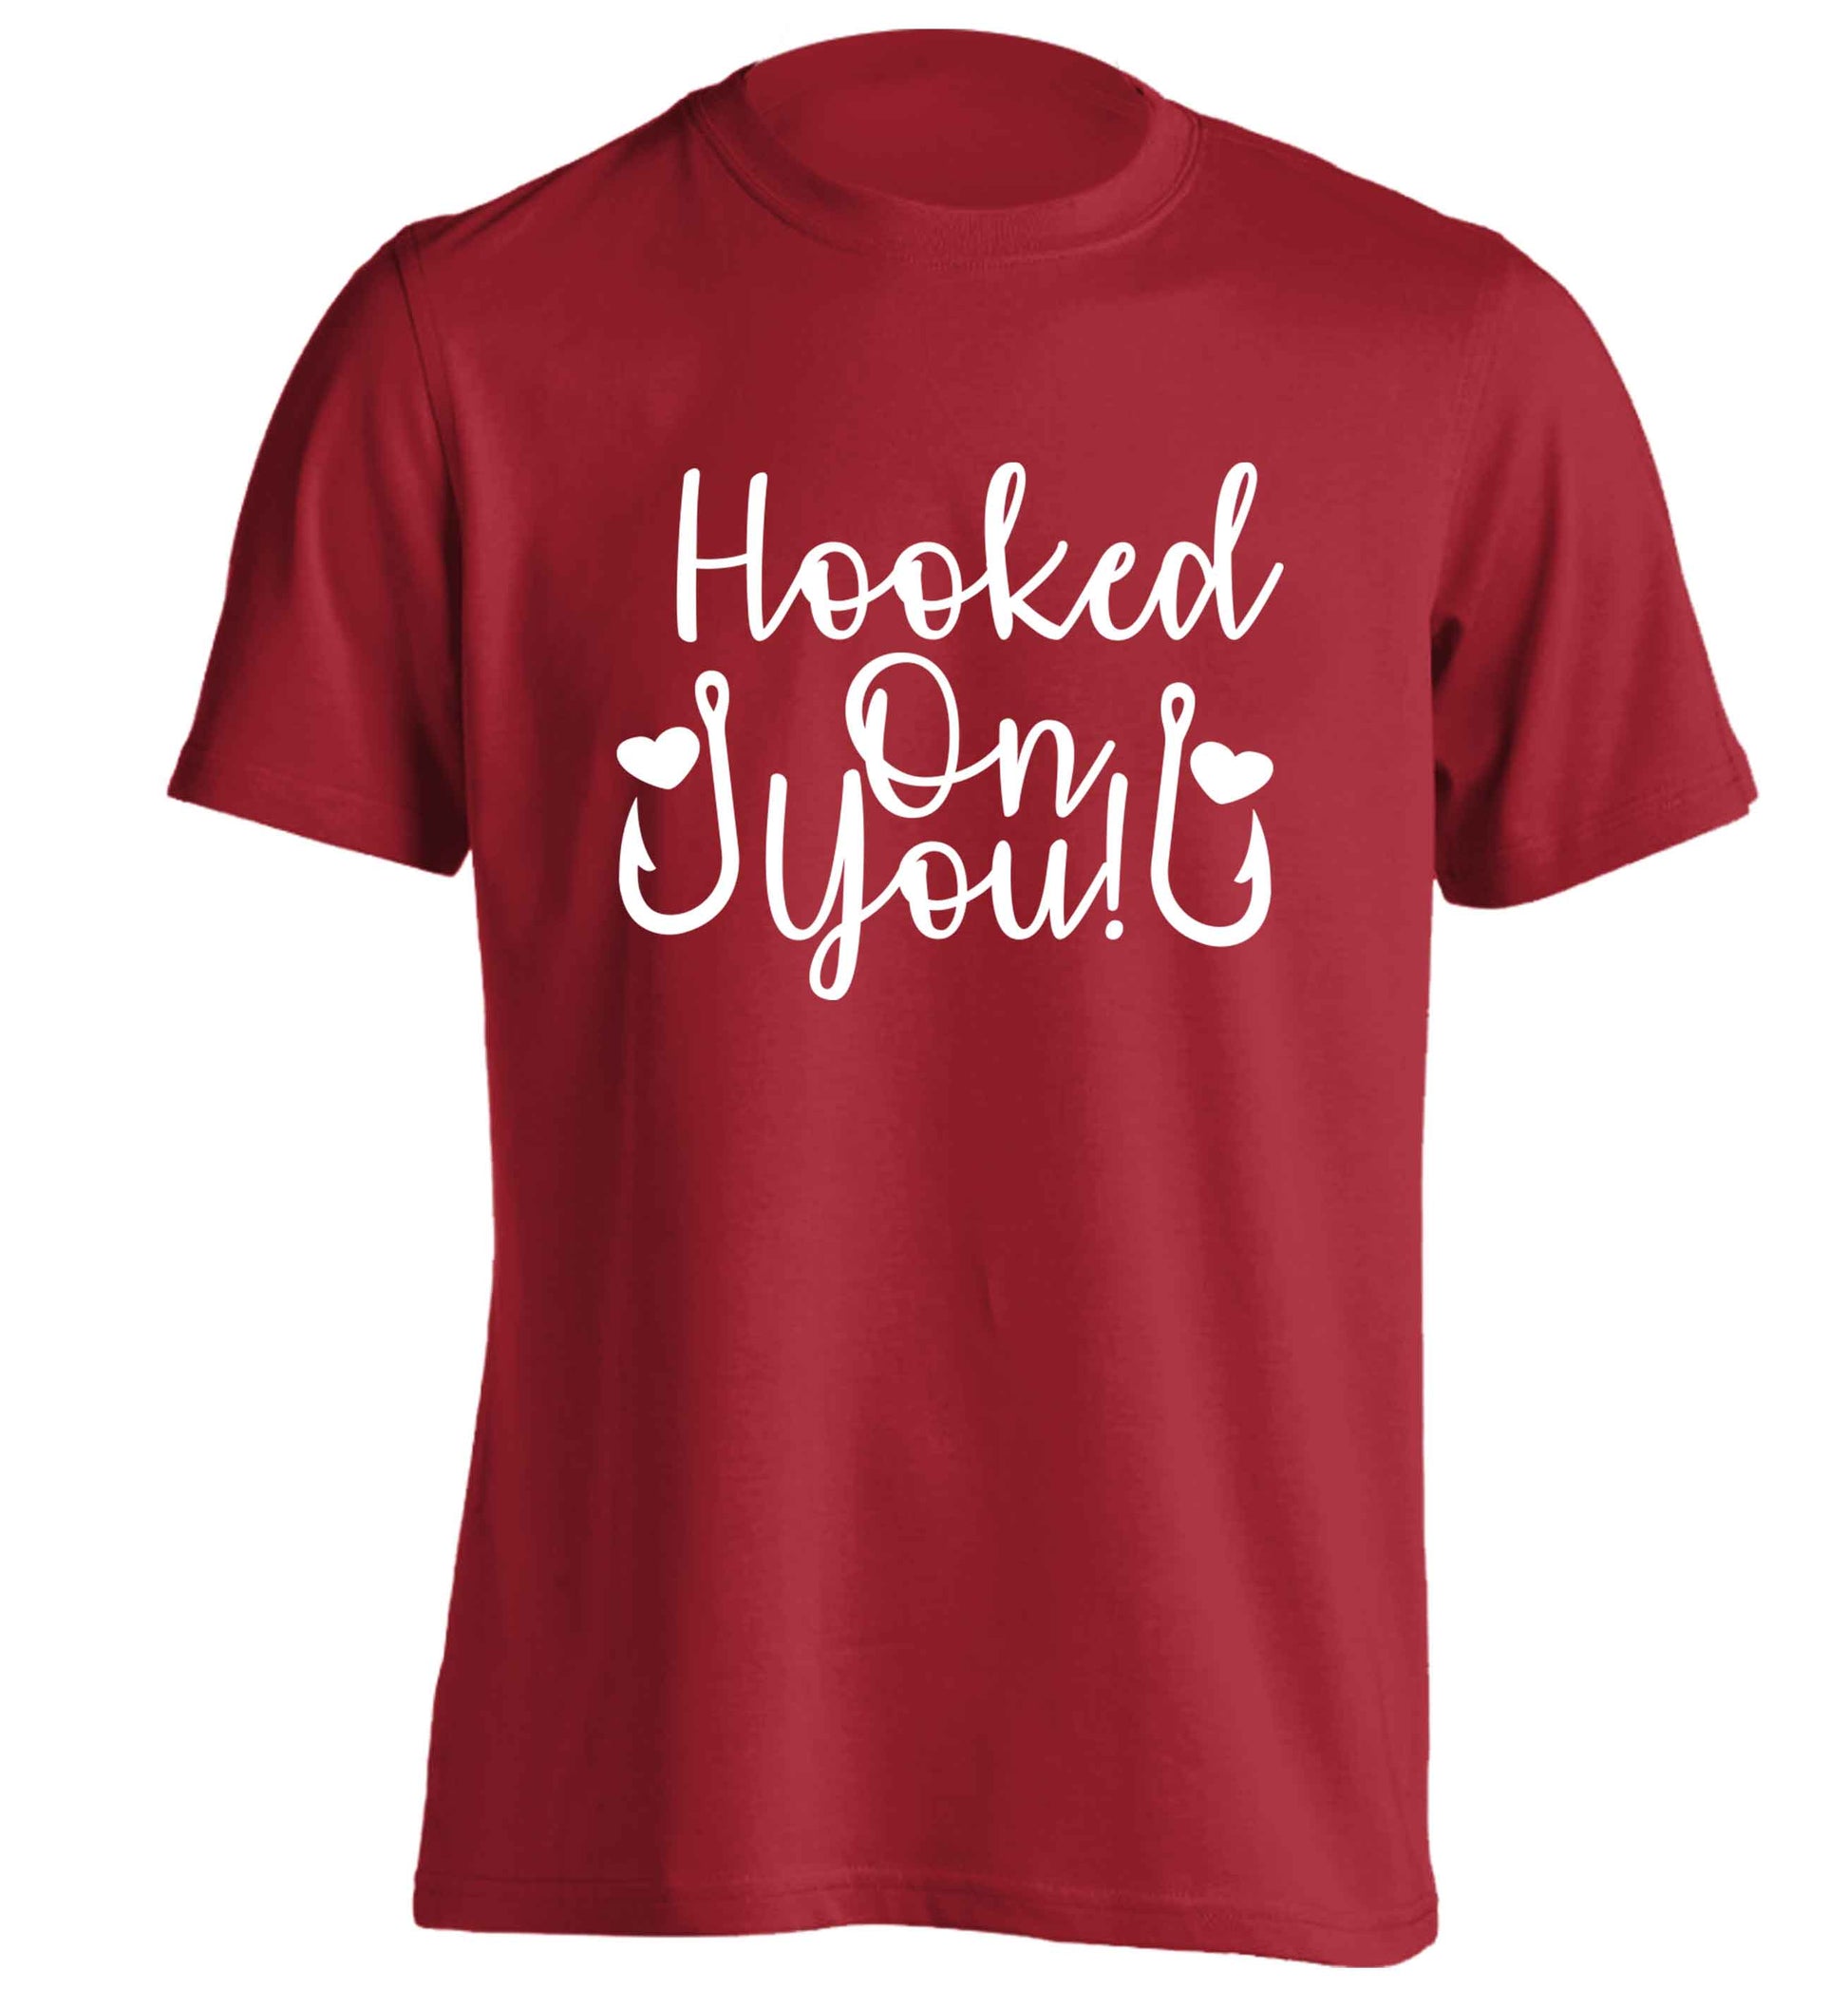 Hooked on you adults unisex red Tshirt 2XL